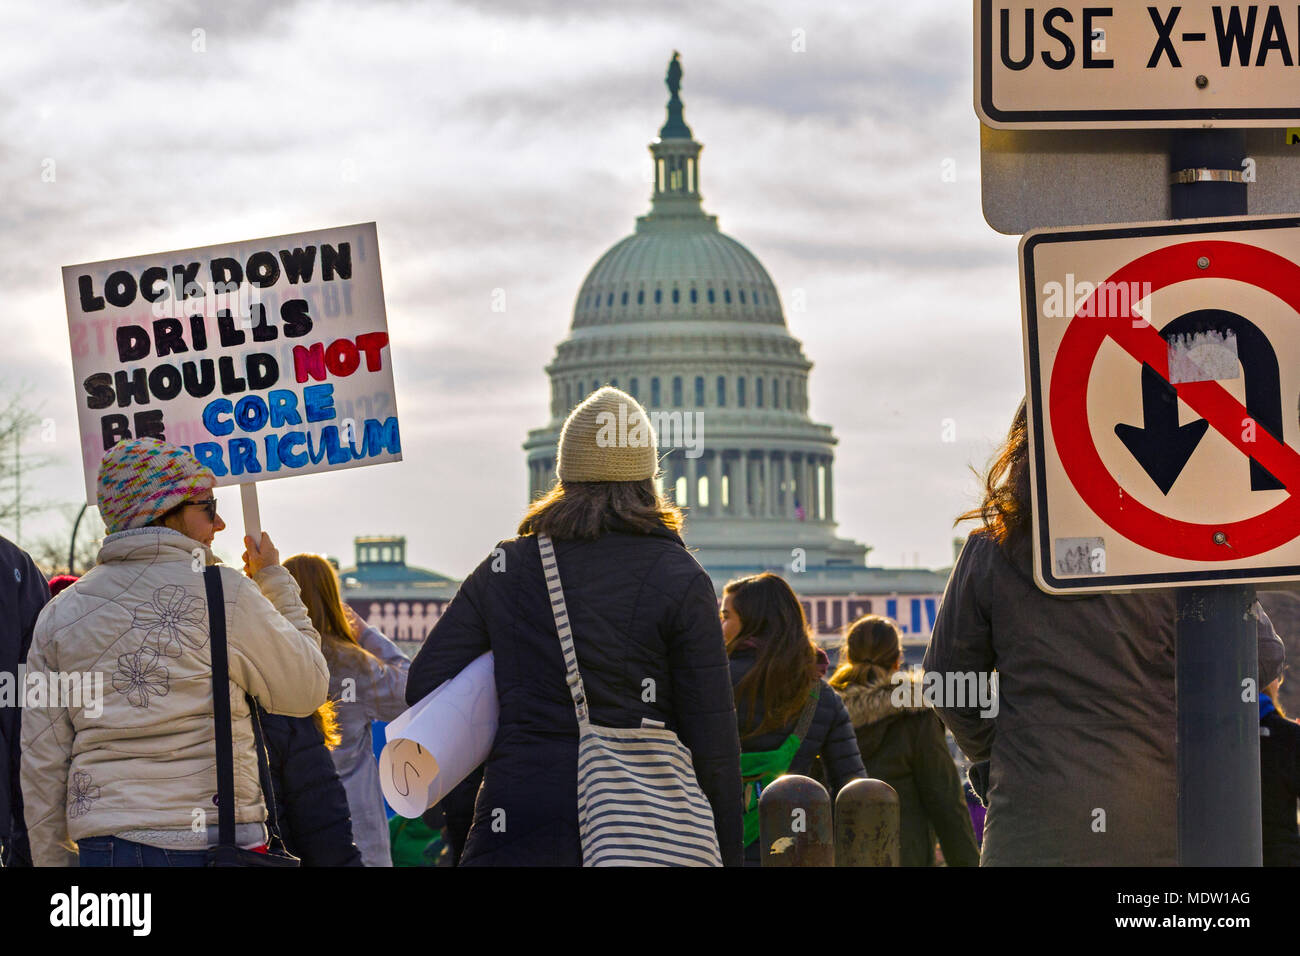 No u-turn sign near Capitol Hill. March For Our Lives rally against gun violence on March 24, 2018 in Washington, DC. Stock Photo